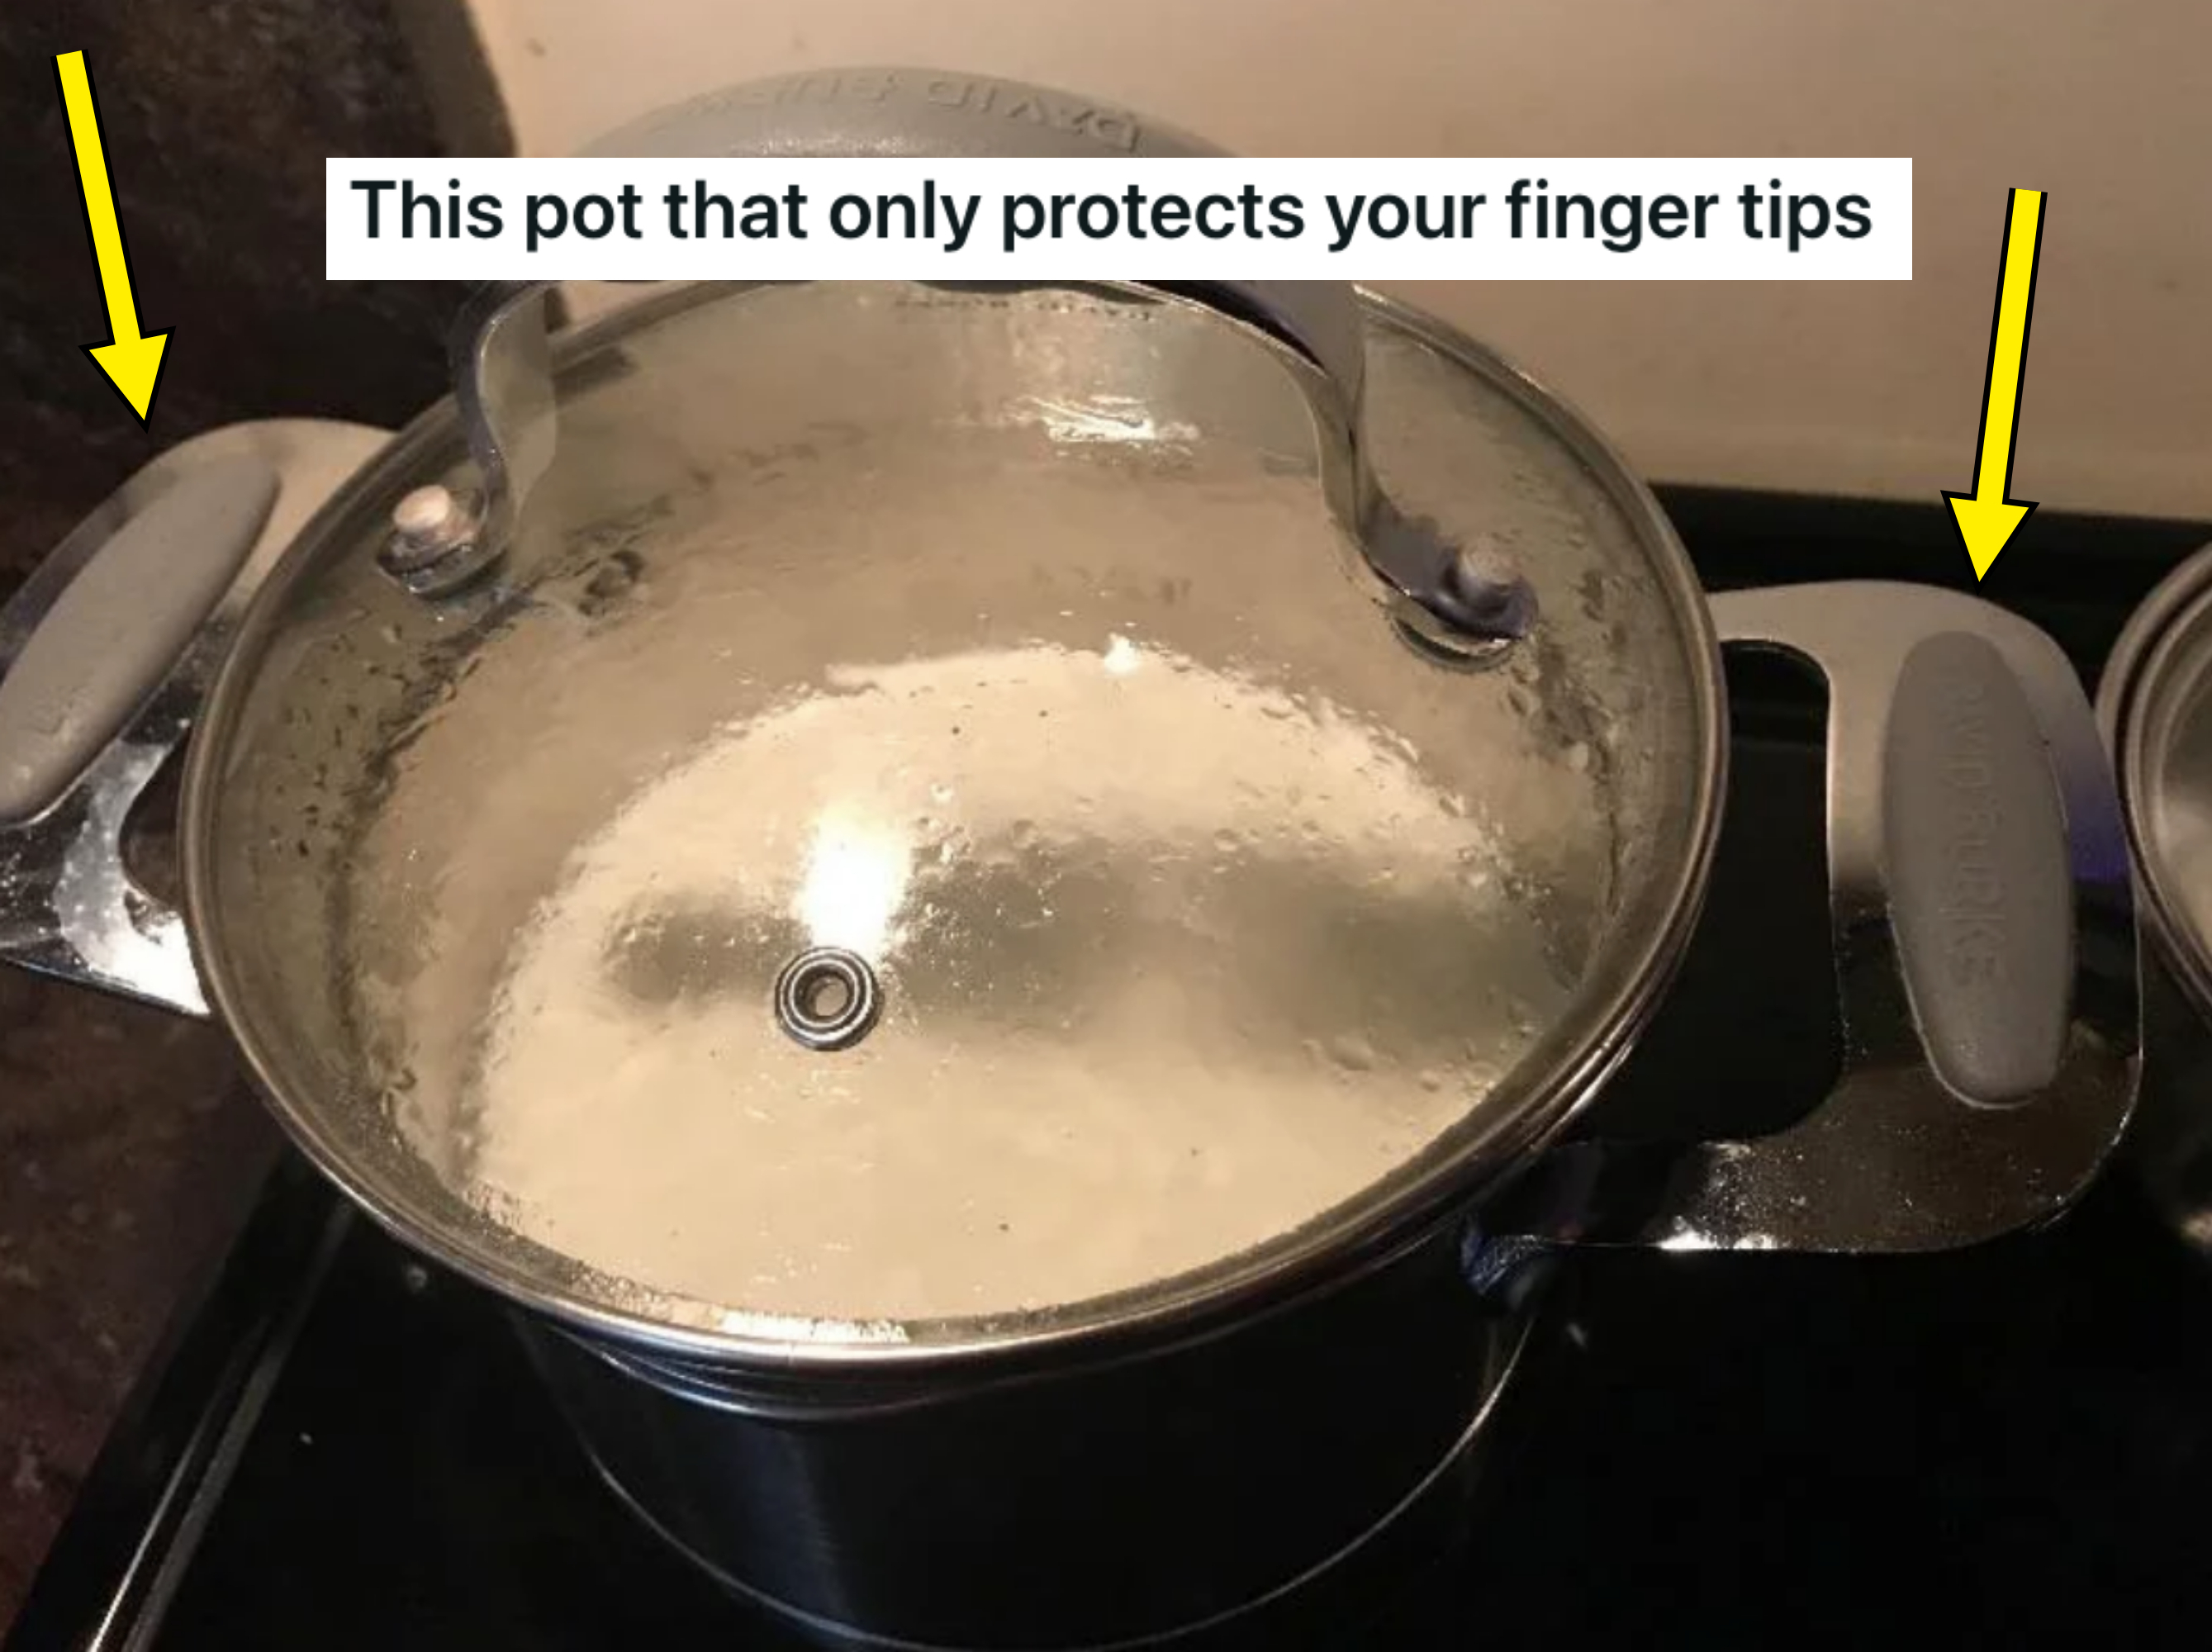 &quot;This pot that only protects your finger tips&quot;